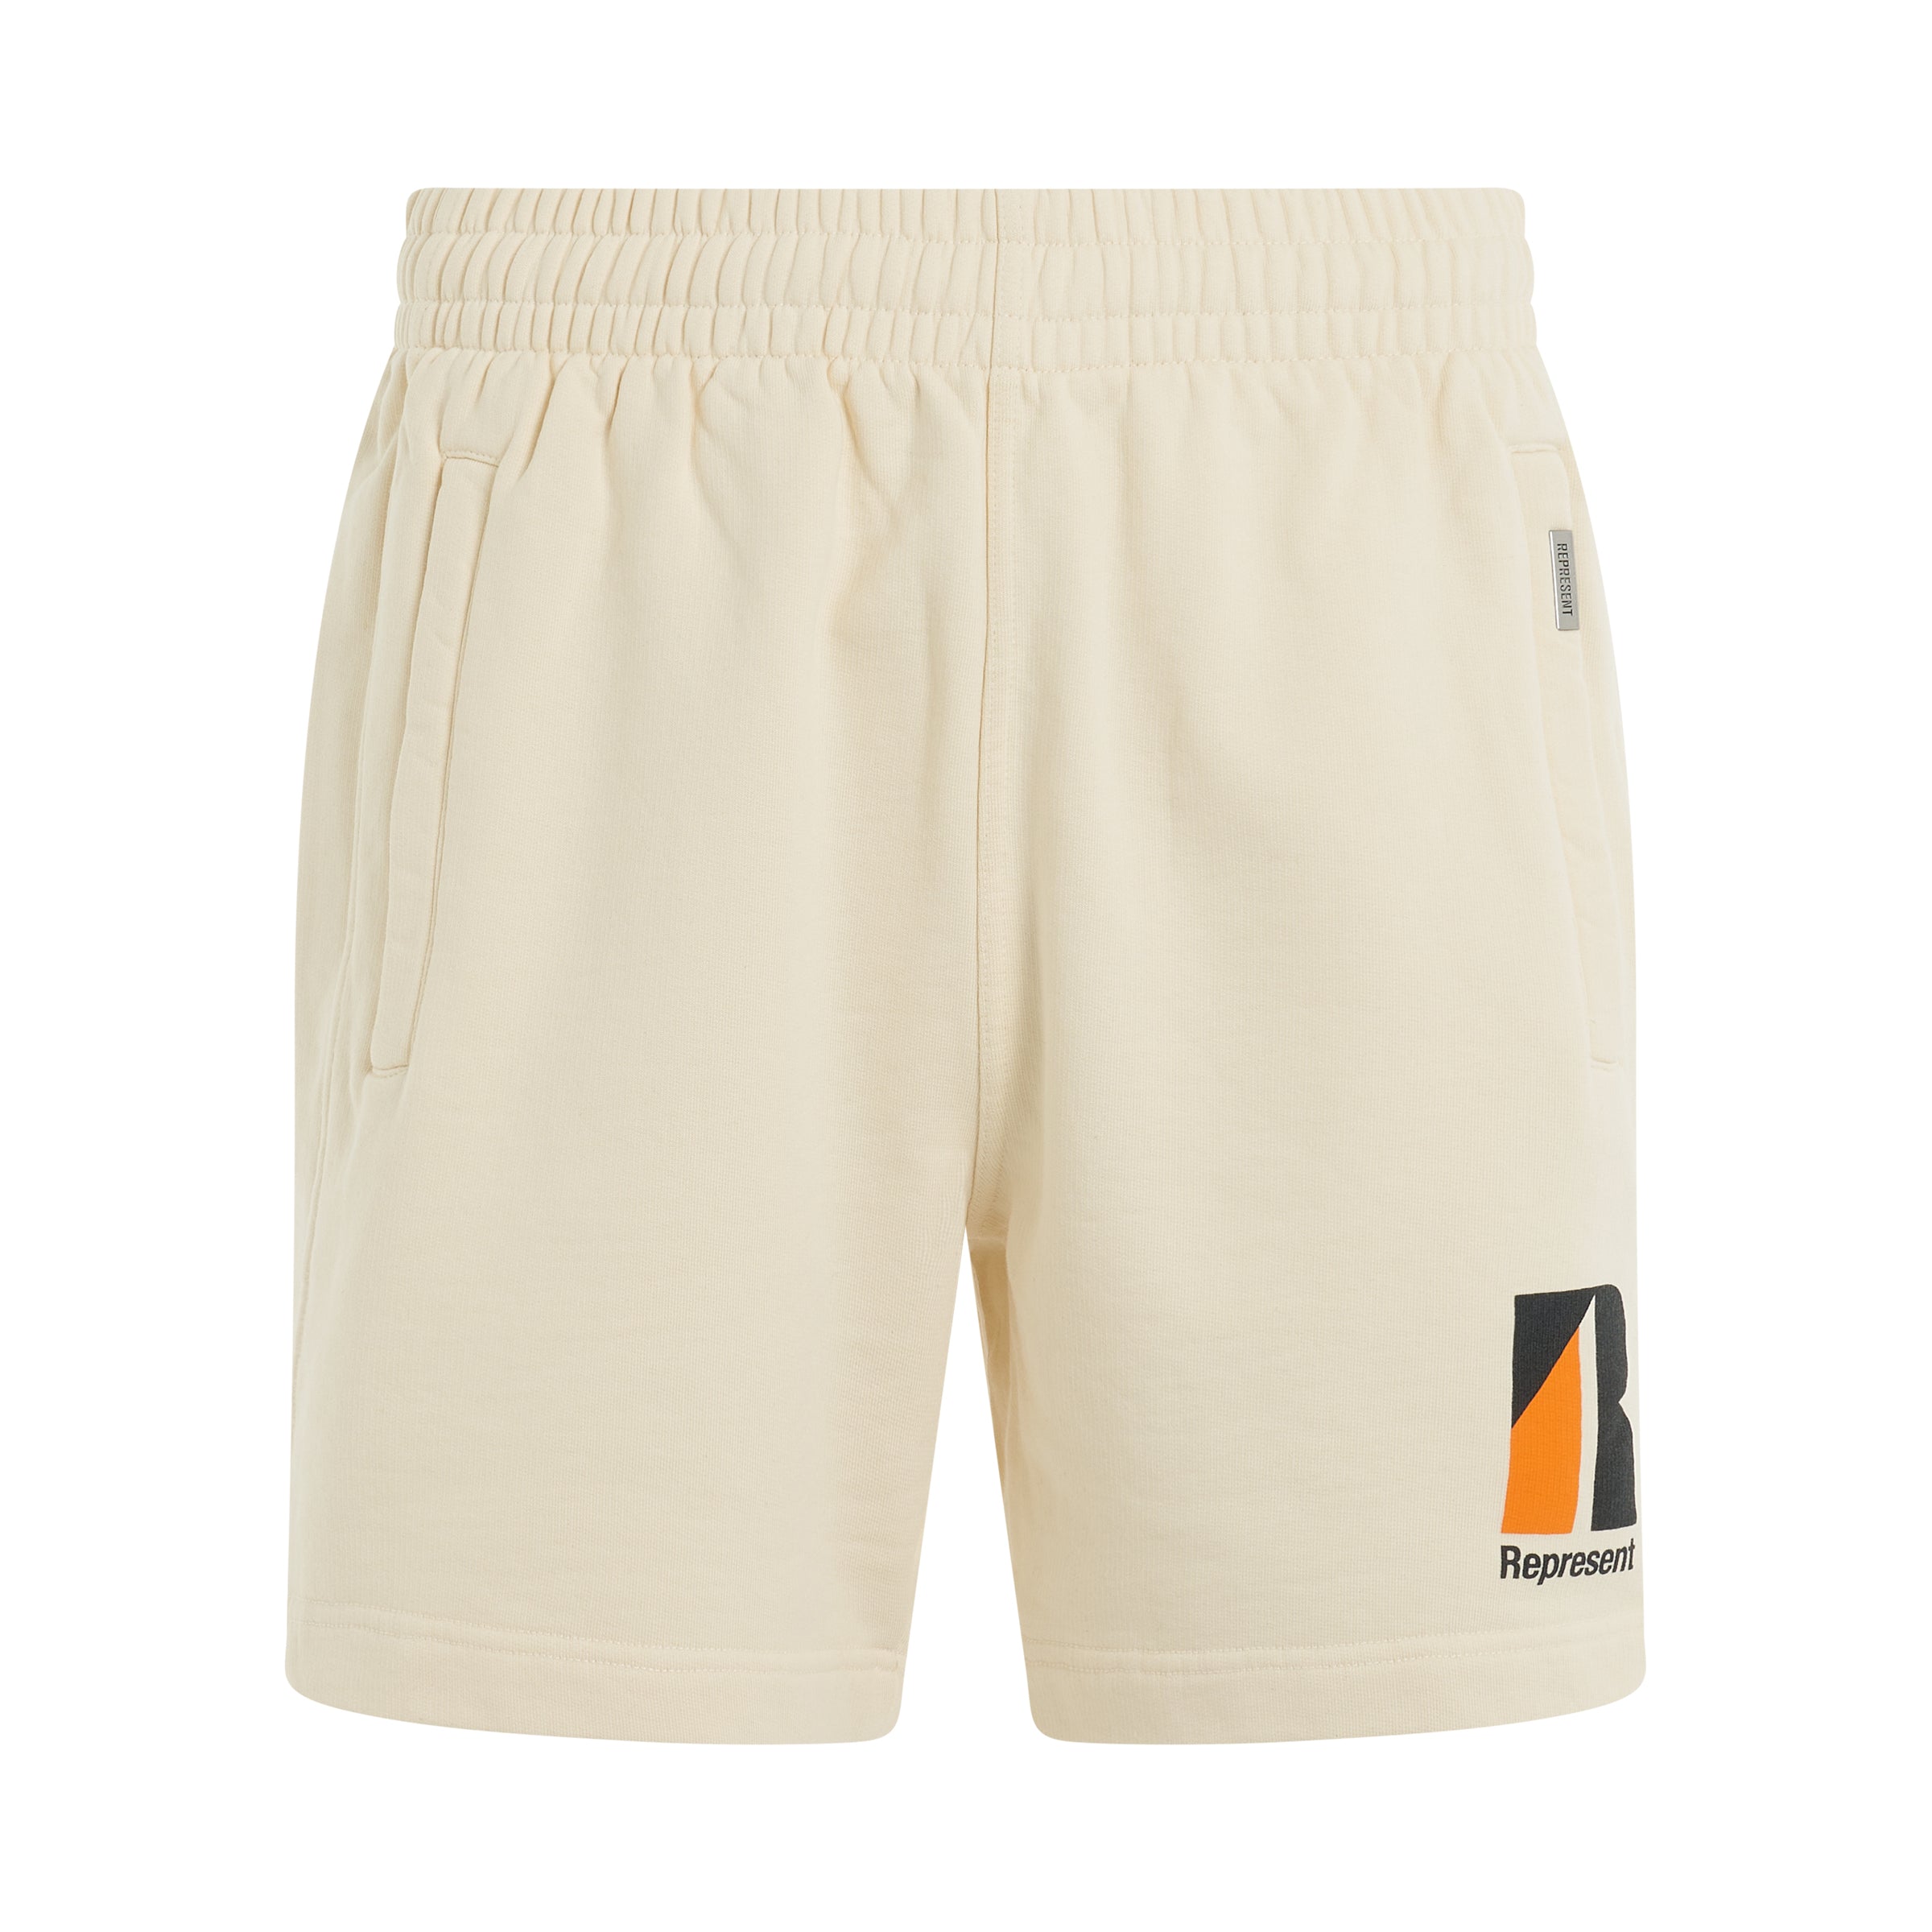 represent decade of speed shorts in cream sold out sold out sale earn ...